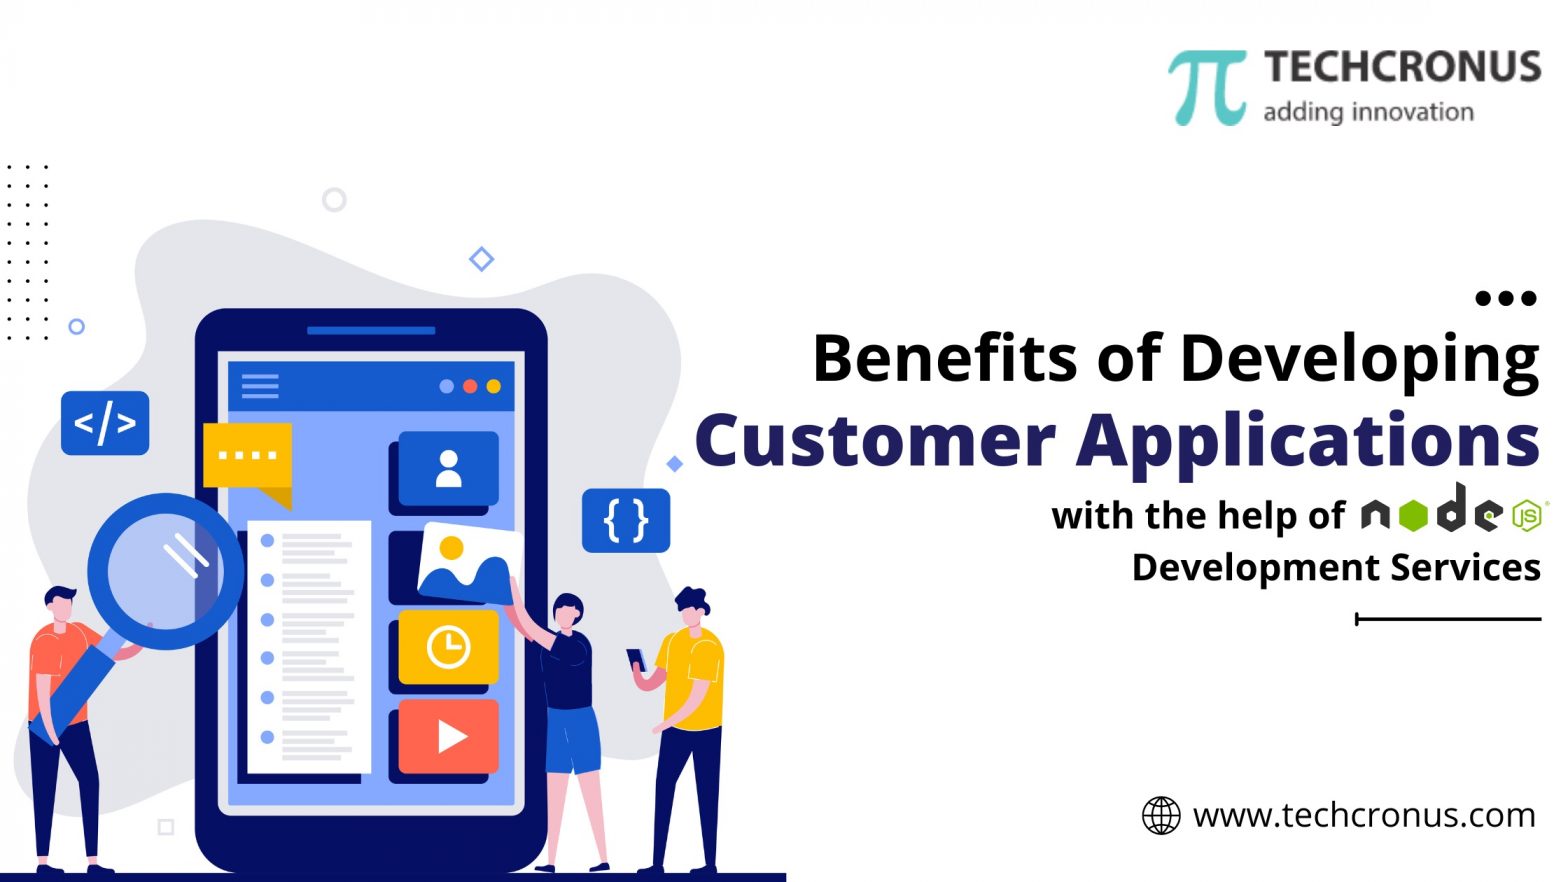 Benefits of Developing Customer Applications with the help of Node js Development Services